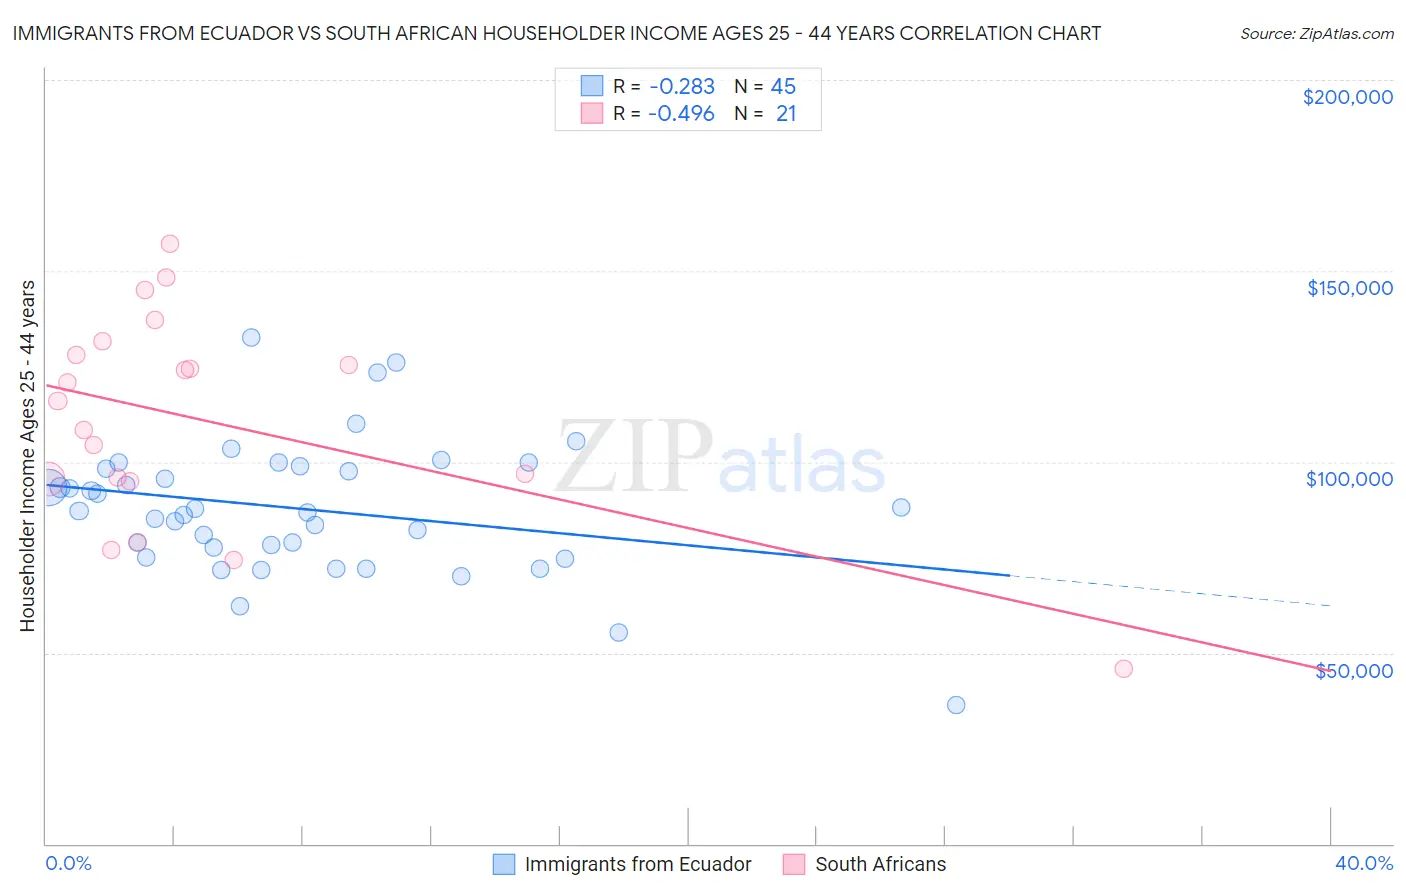 Immigrants from Ecuador vs South African Householder Income Ages 25 - 44 years